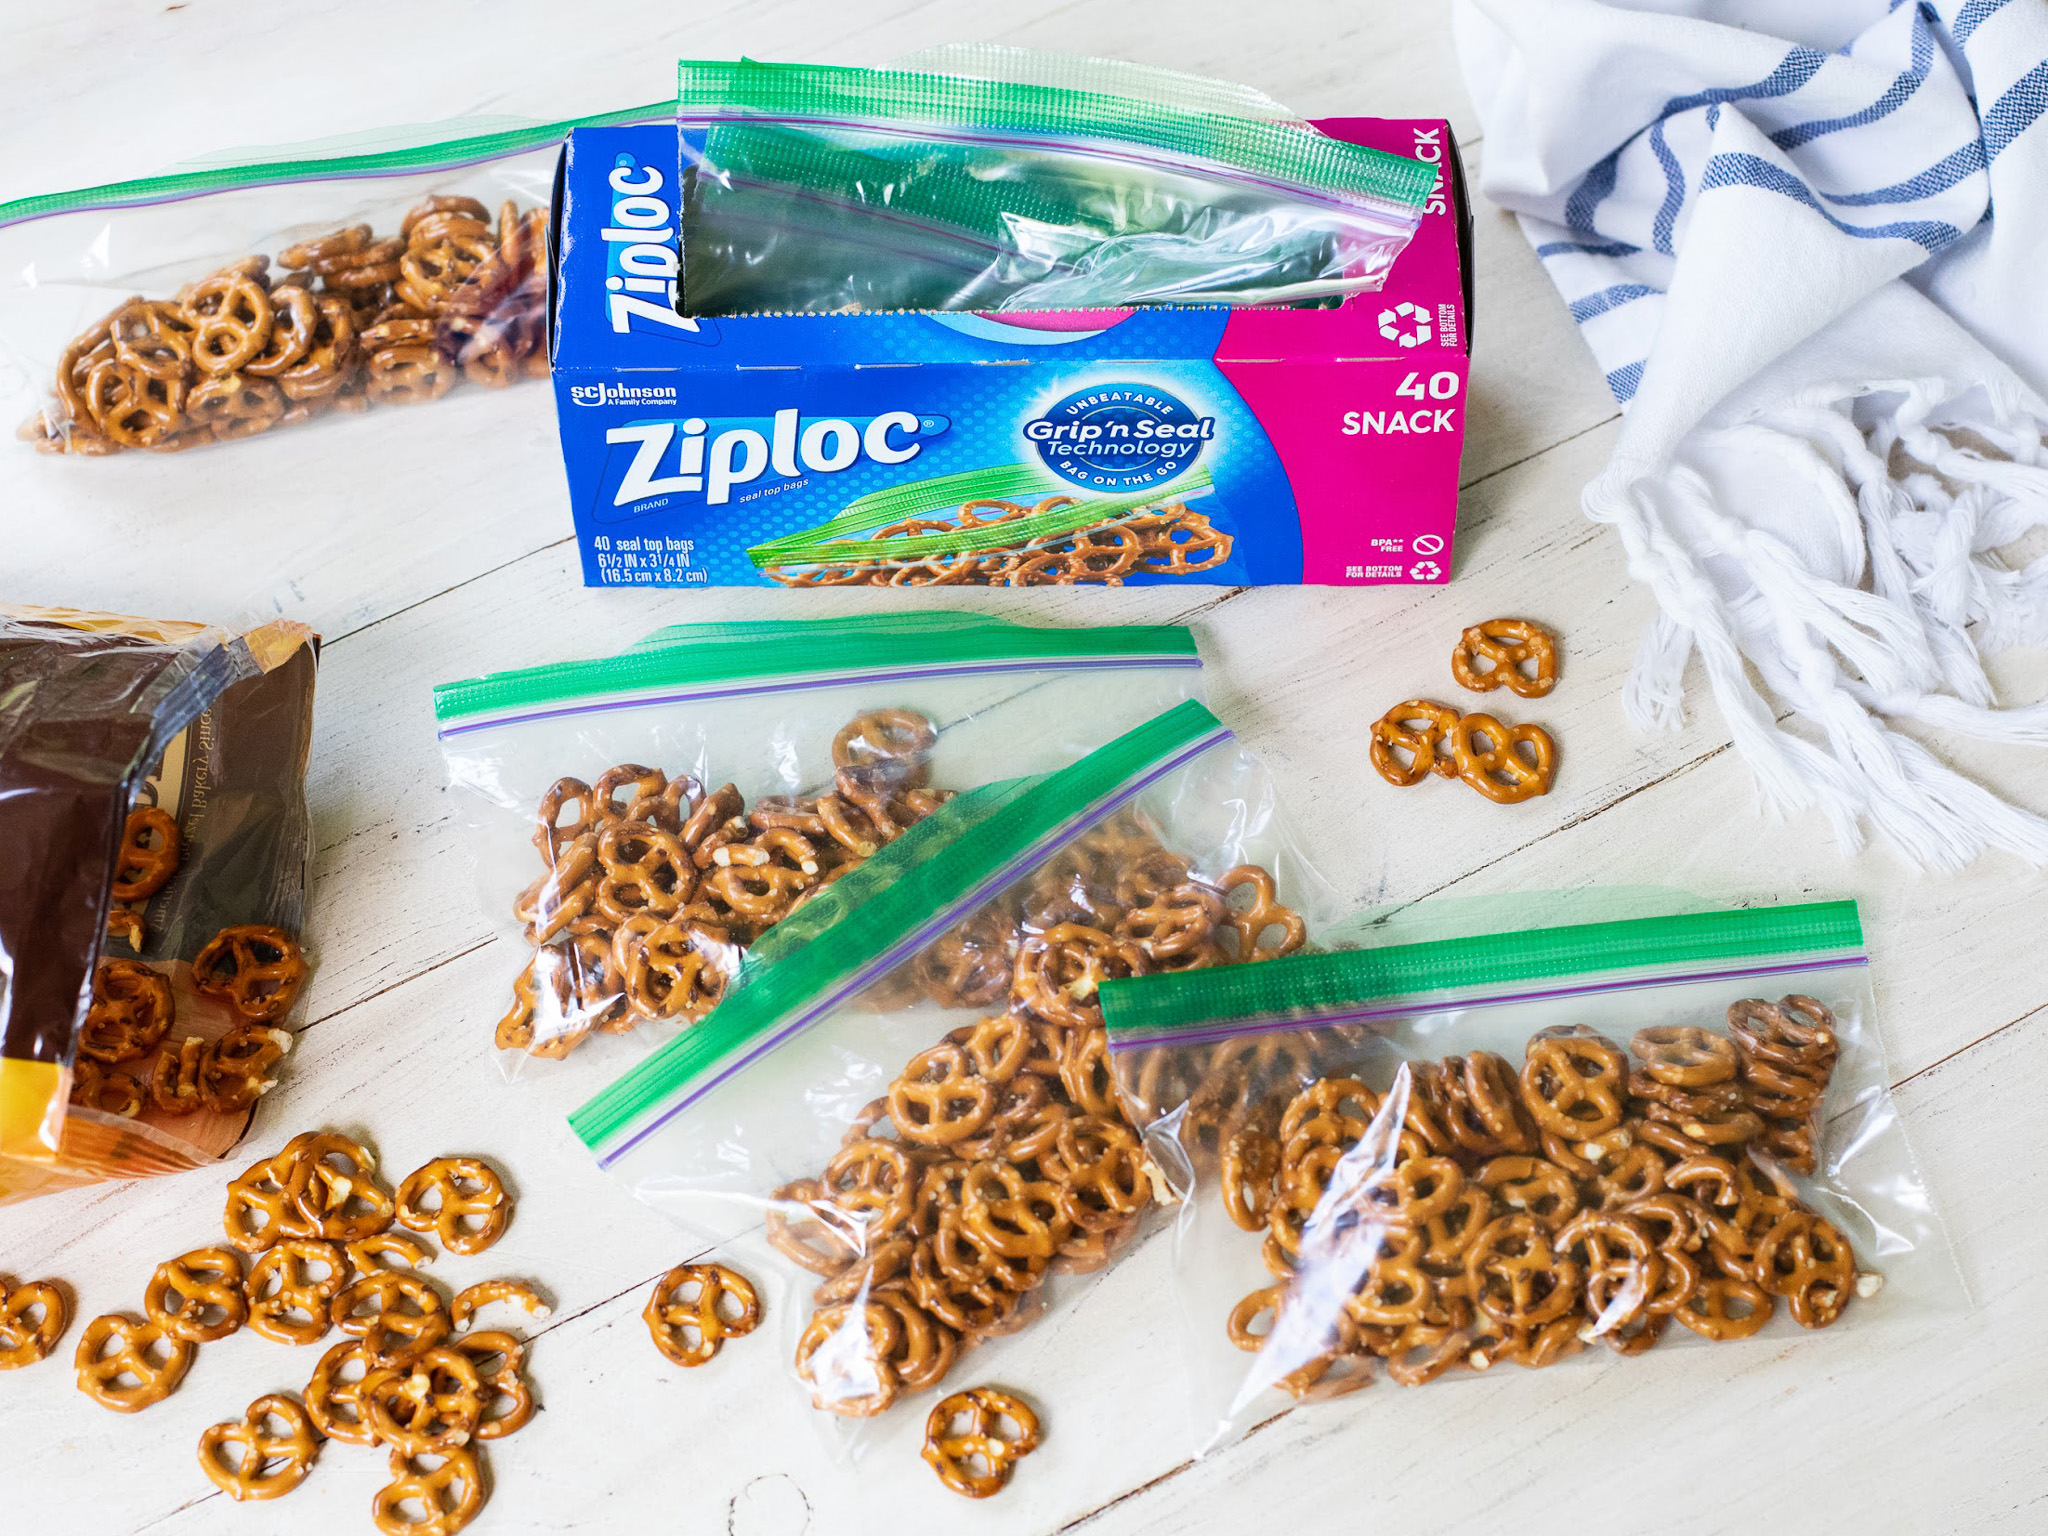 Look For Ziploc® Brand Bags On Sale NOW At Publix - iHeartPublix